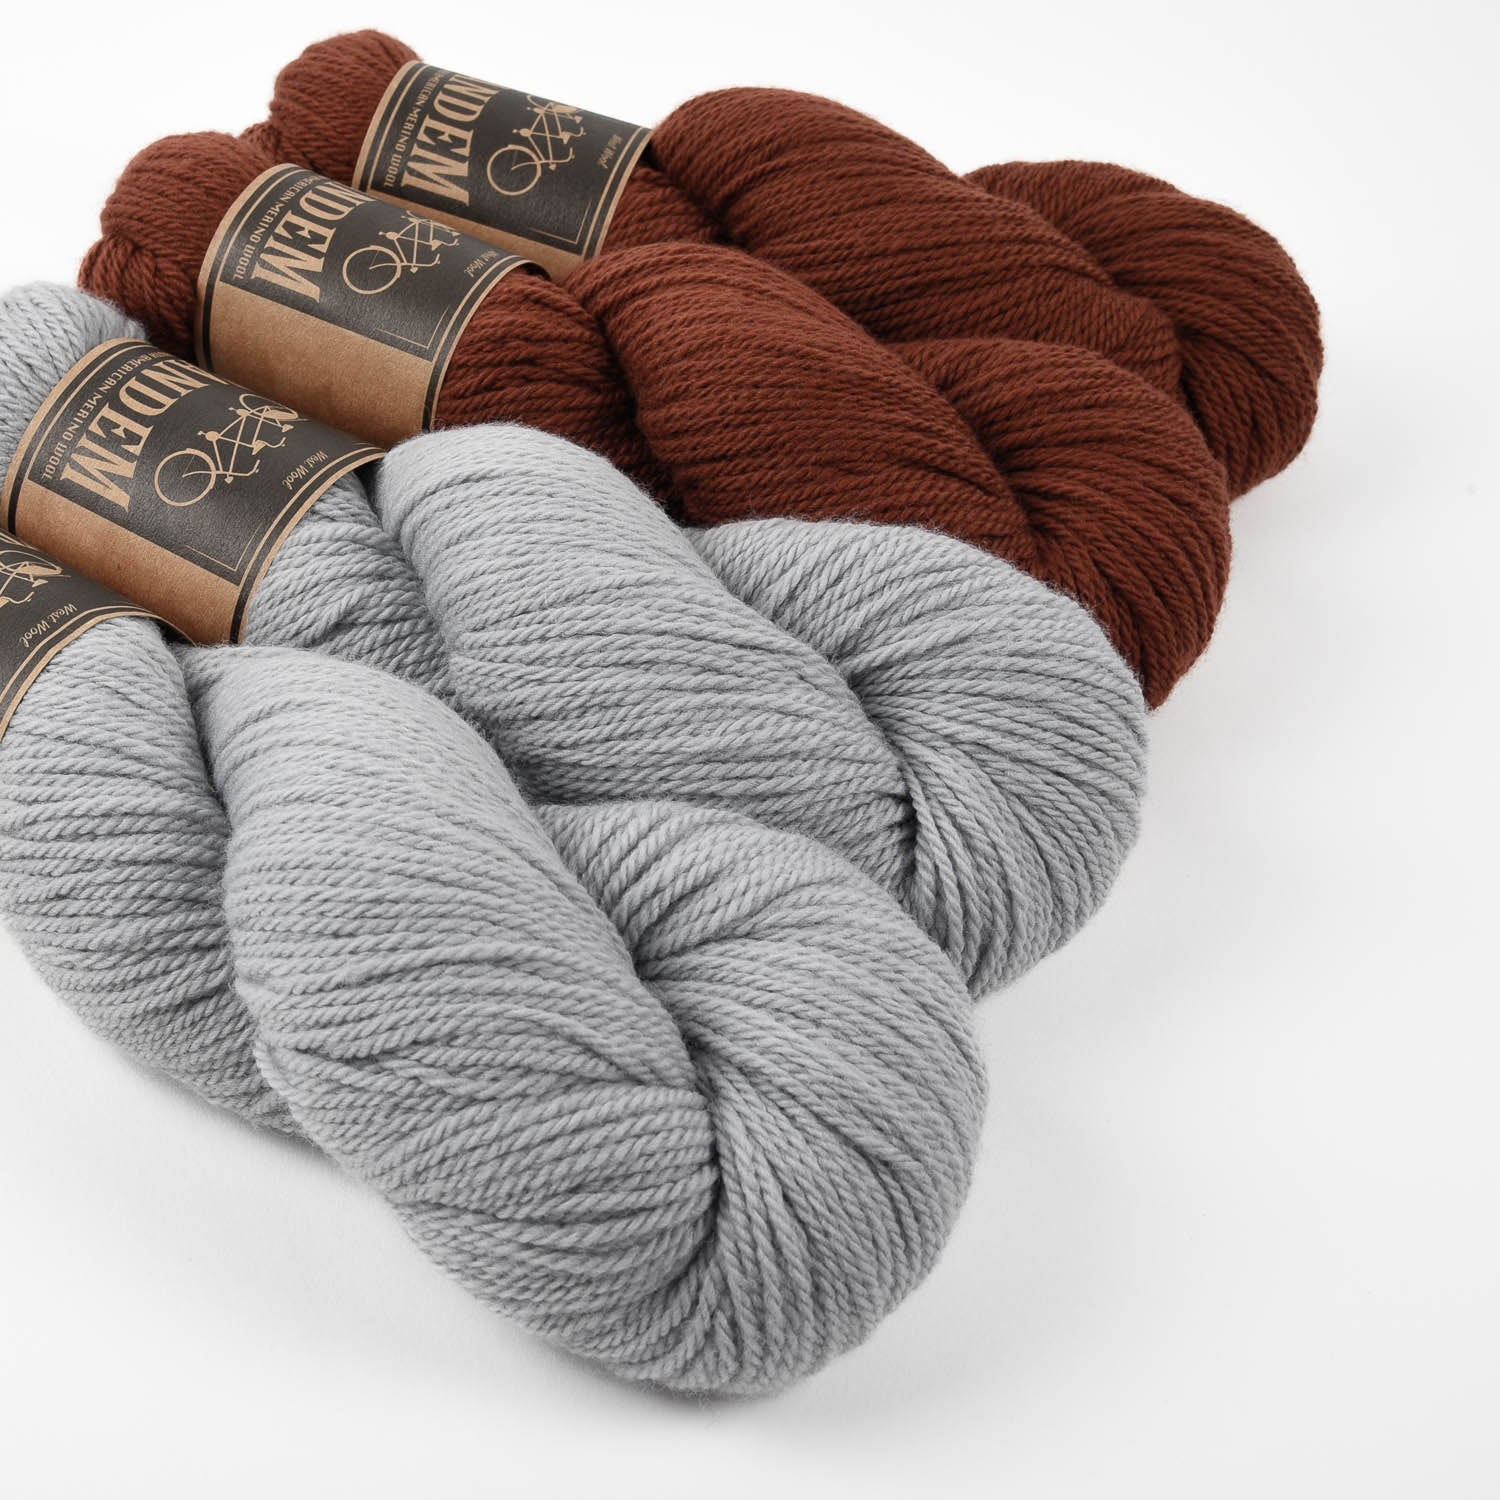 WESTKNITS KIT - CHESTNUTS IN THE SKY